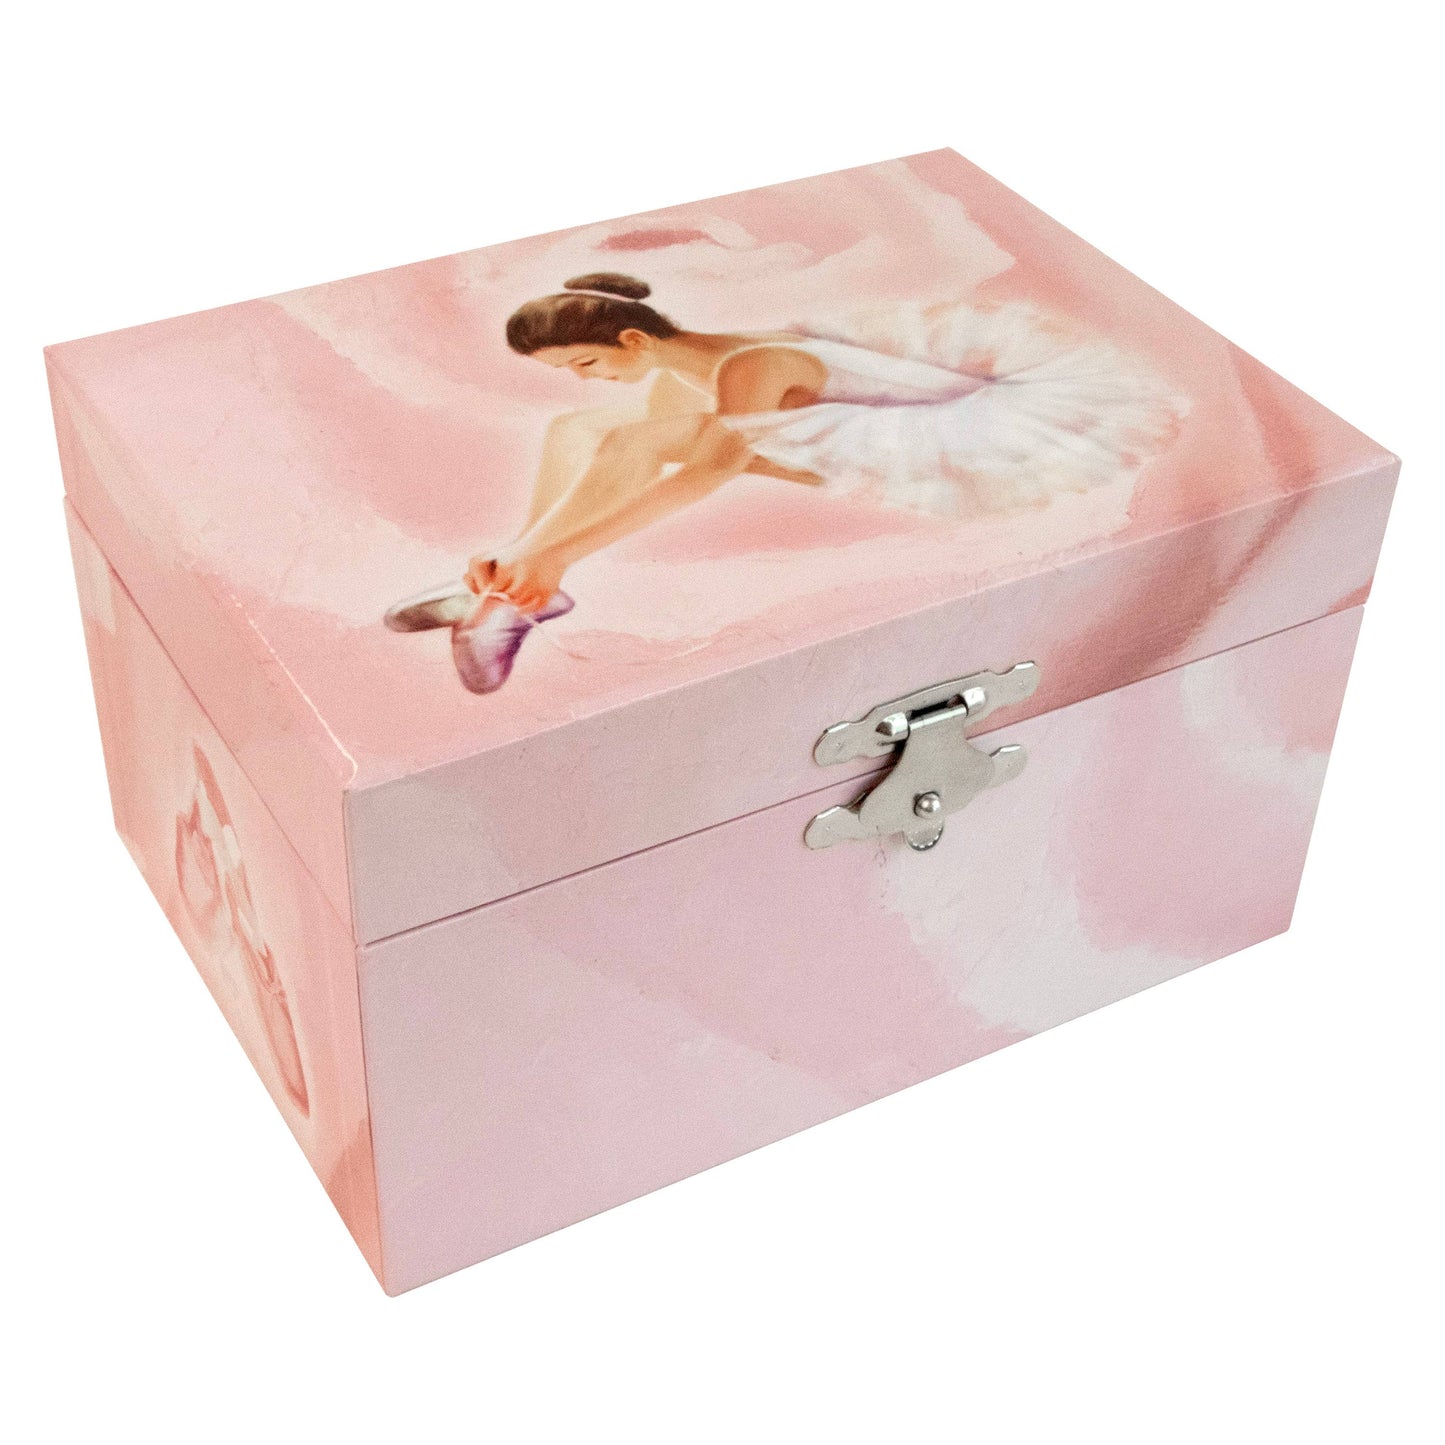 Mele and Co Casey Girl's Musical Ballerina Jewelry Box: Girls Musical Ballerina Jewelry Box / Waltz of the Flowers / Large